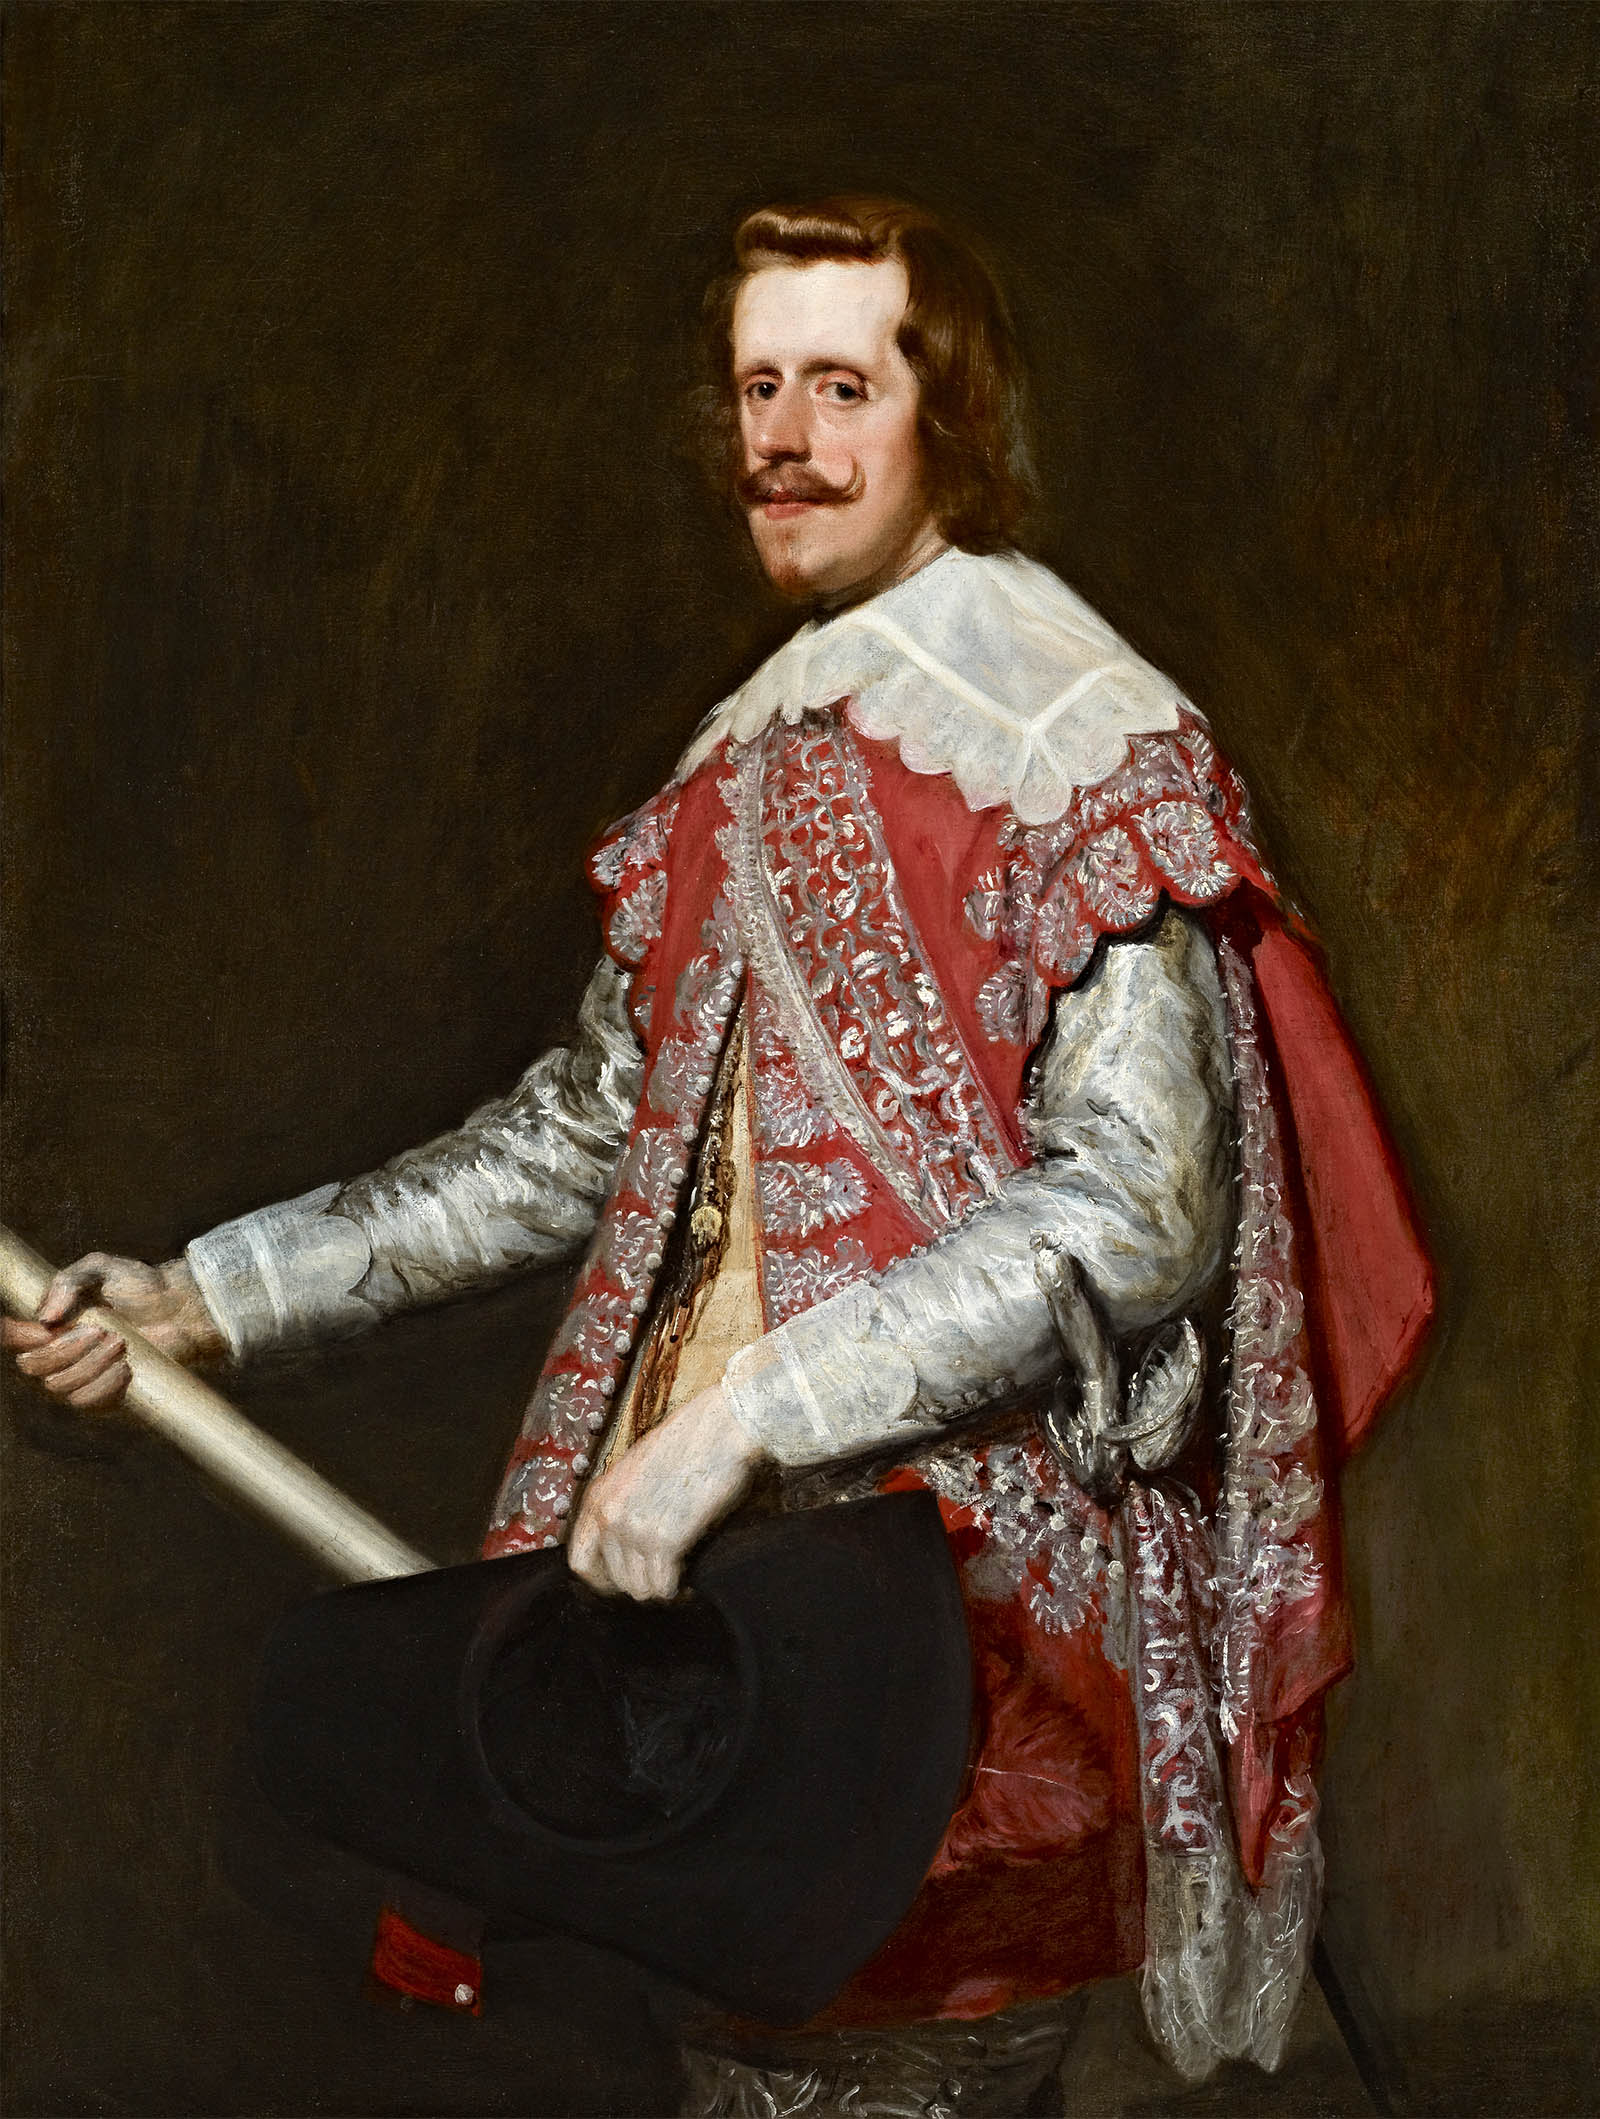 Diego Rodriguez de Silva y Velázquez, King Philip IV of Spain, 1644. Oil on canvas. The Frick Collection, New York. Inv. 1911.1.123. Photo: Michael Bodycomb